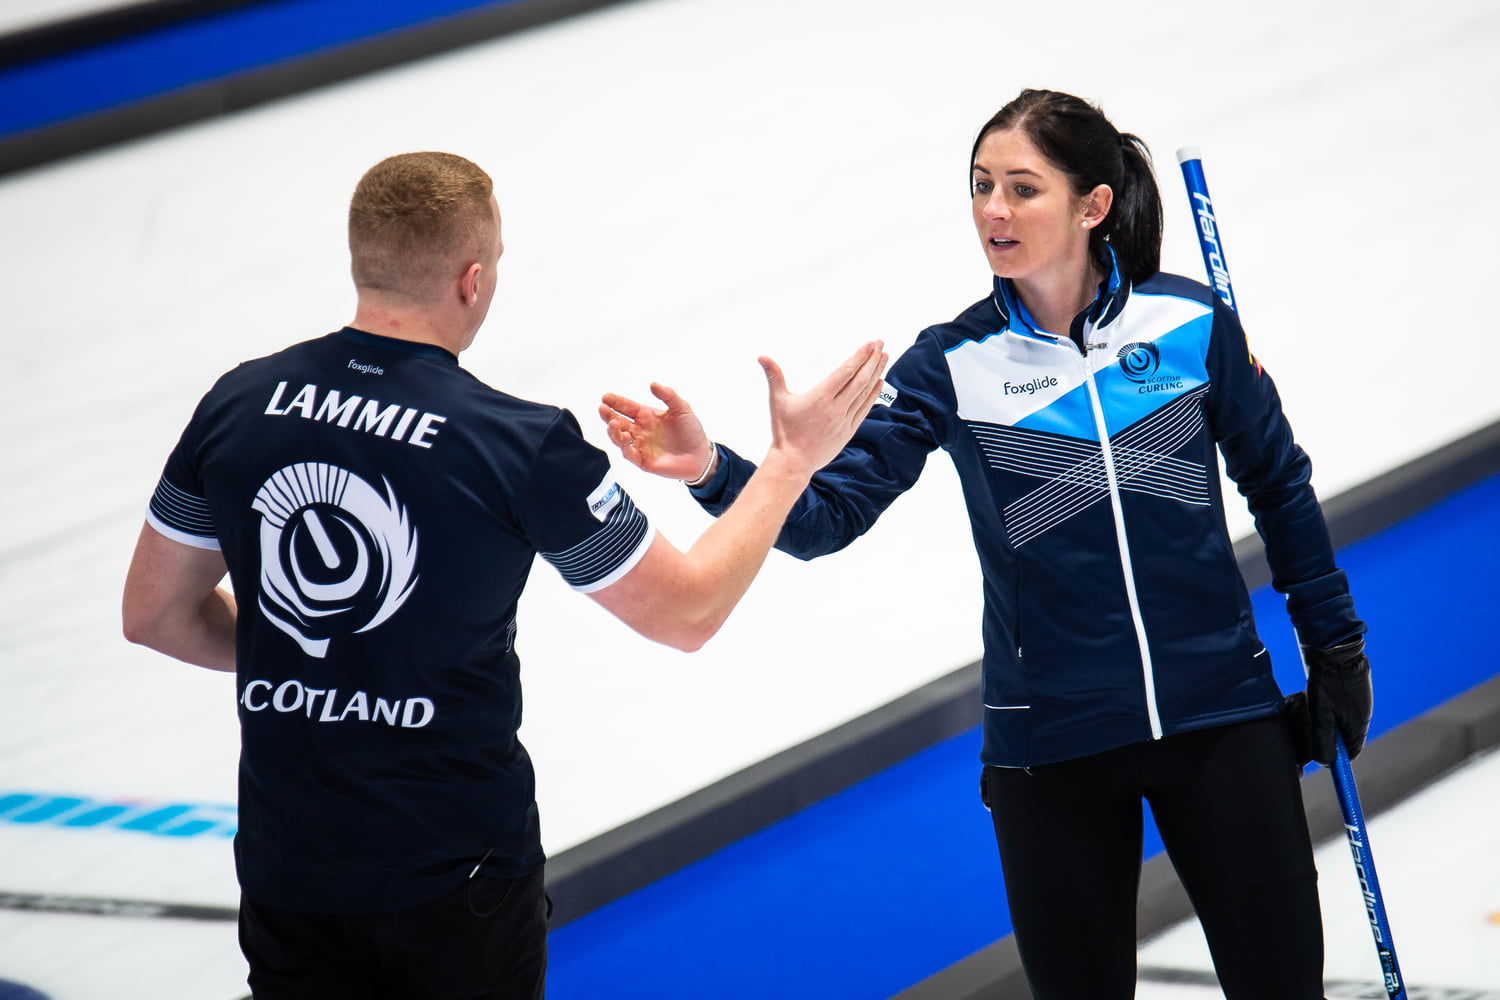 PLAYOFF RACE HEATING UP AT WORLD MIXED DOUBLES